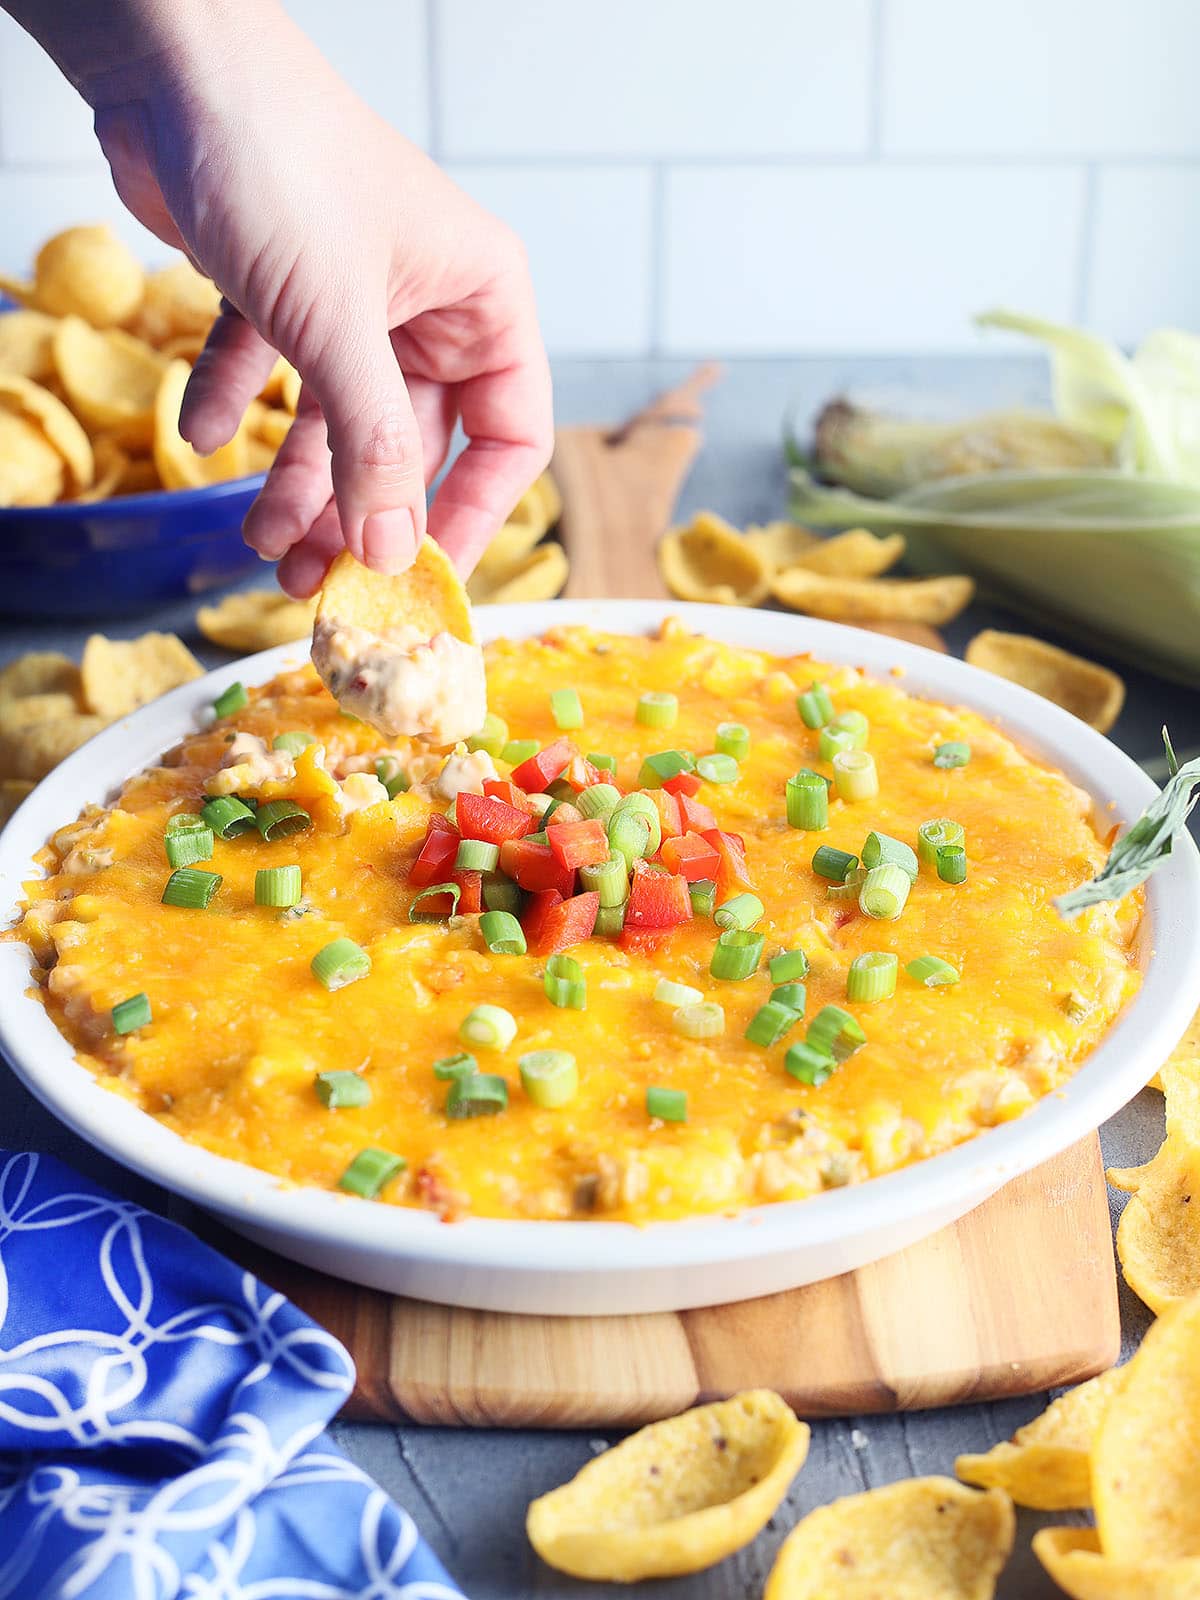 hand dipping a corn chip into a dish of hot corn dip with cream cheese